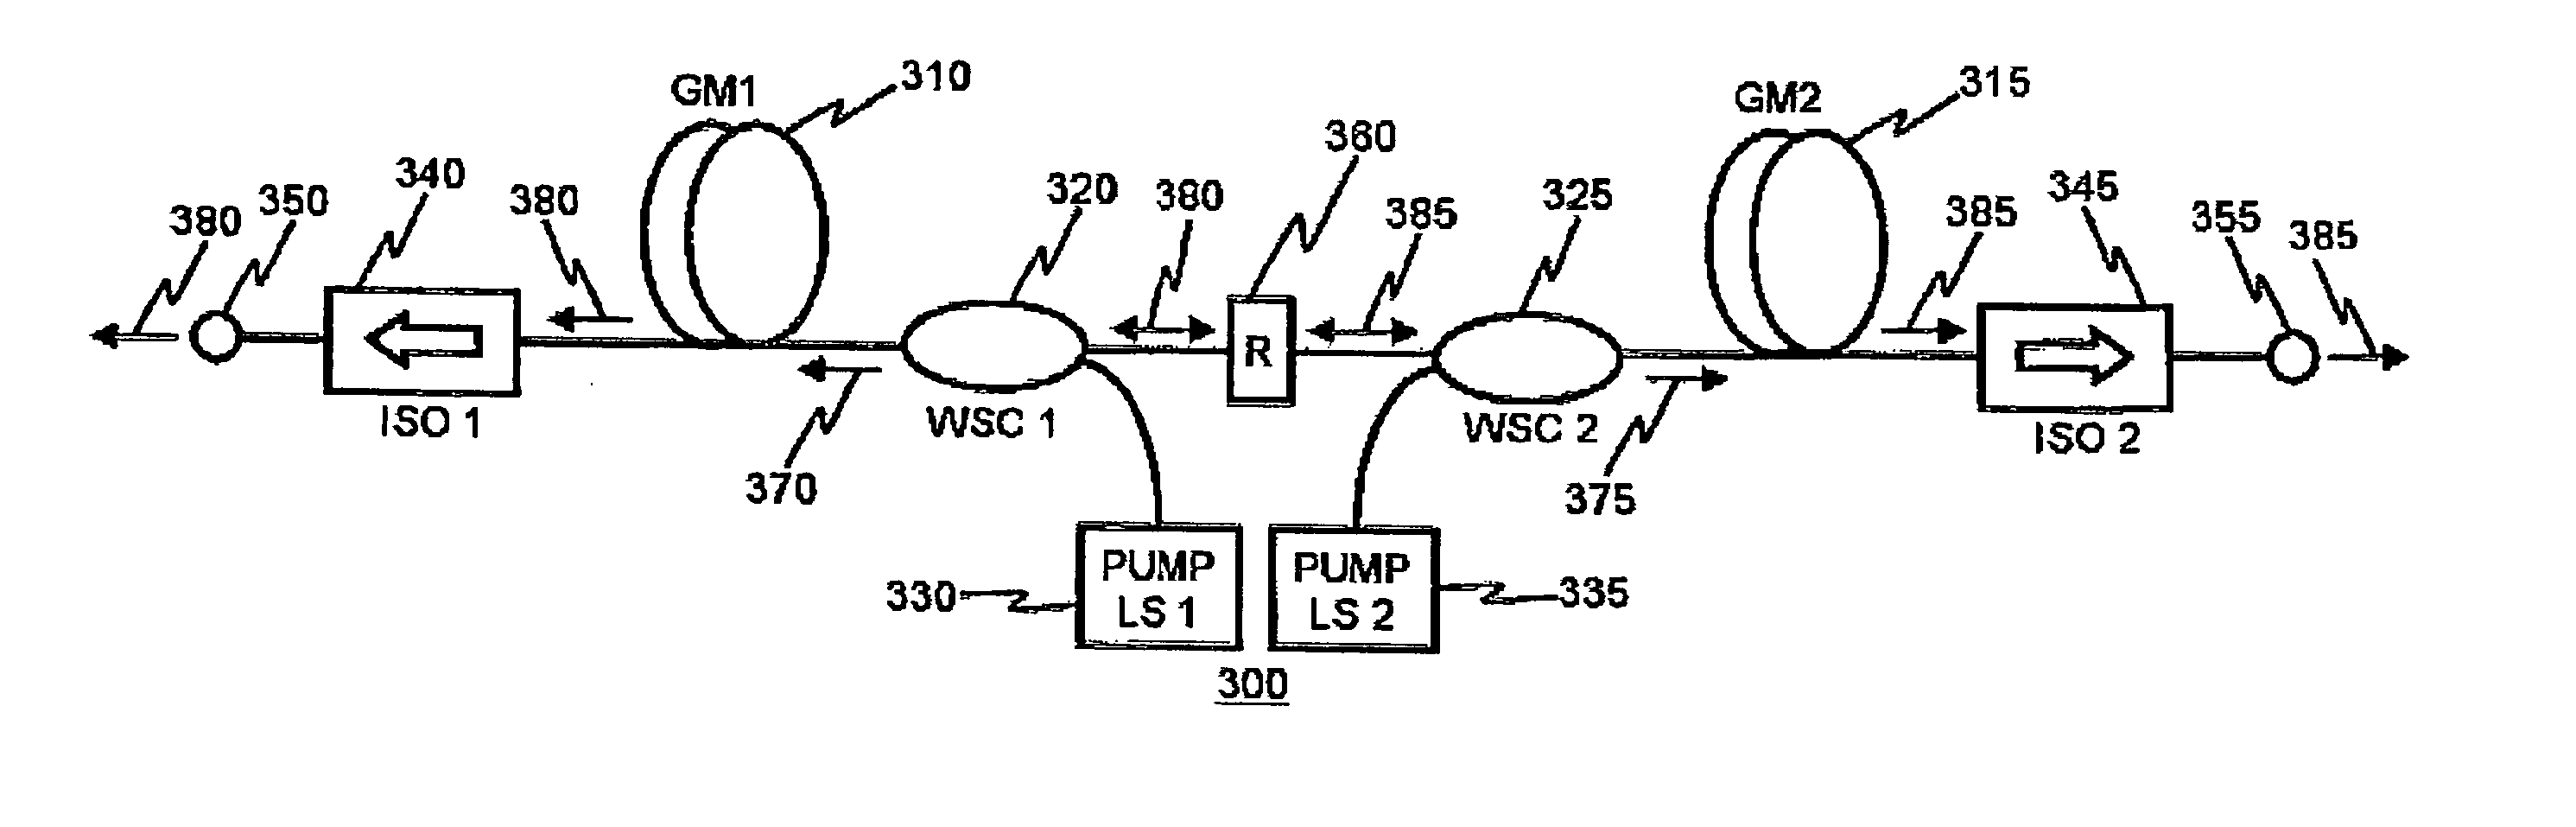 Dual-port broadband light source with independently controllable output powers